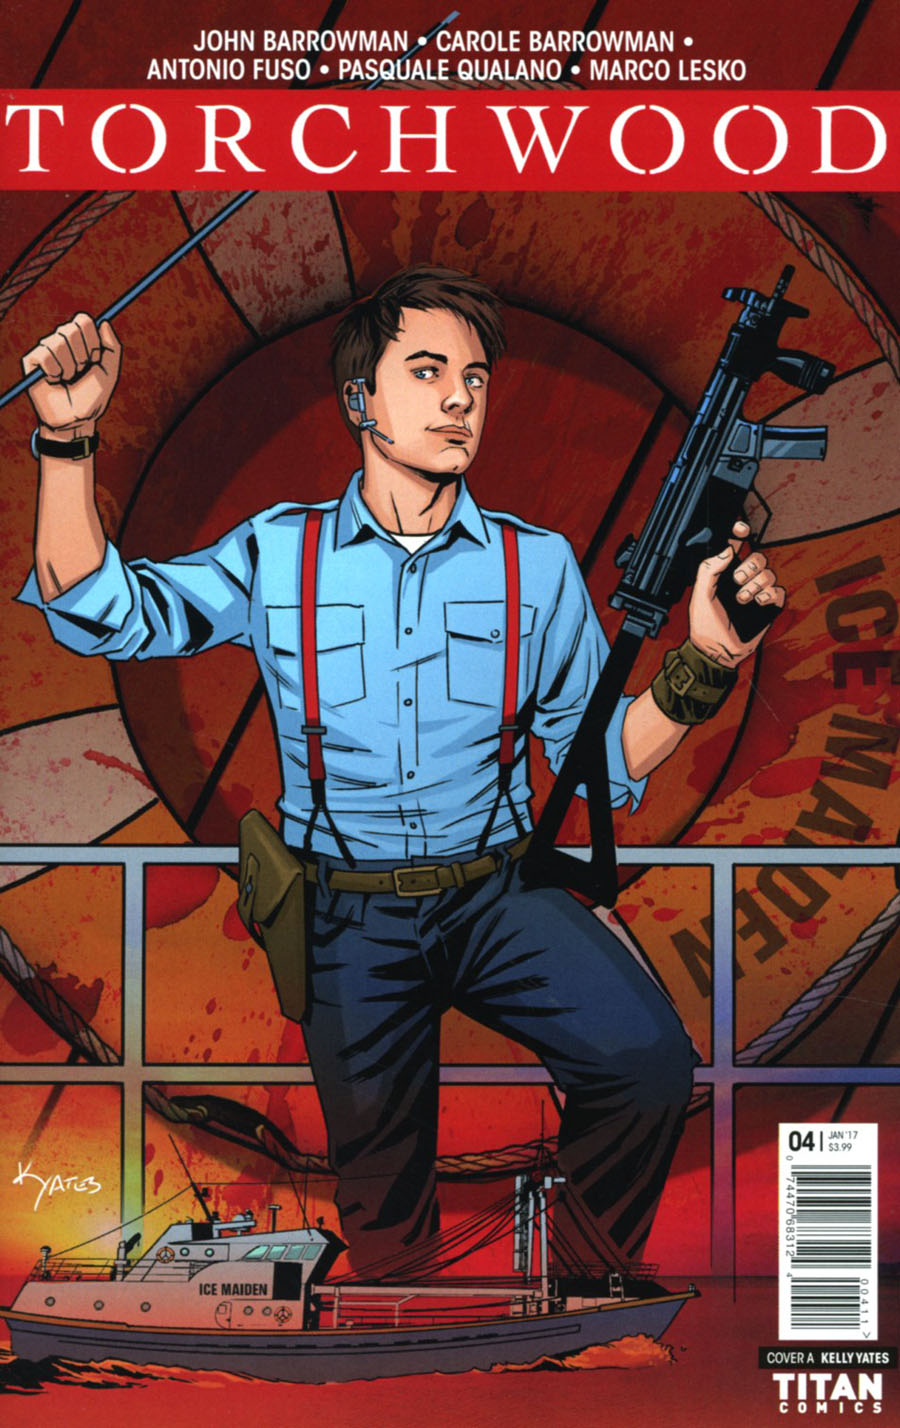 Torchwood Vol 2 #4 Cover A Regular Kelly Yates Cover